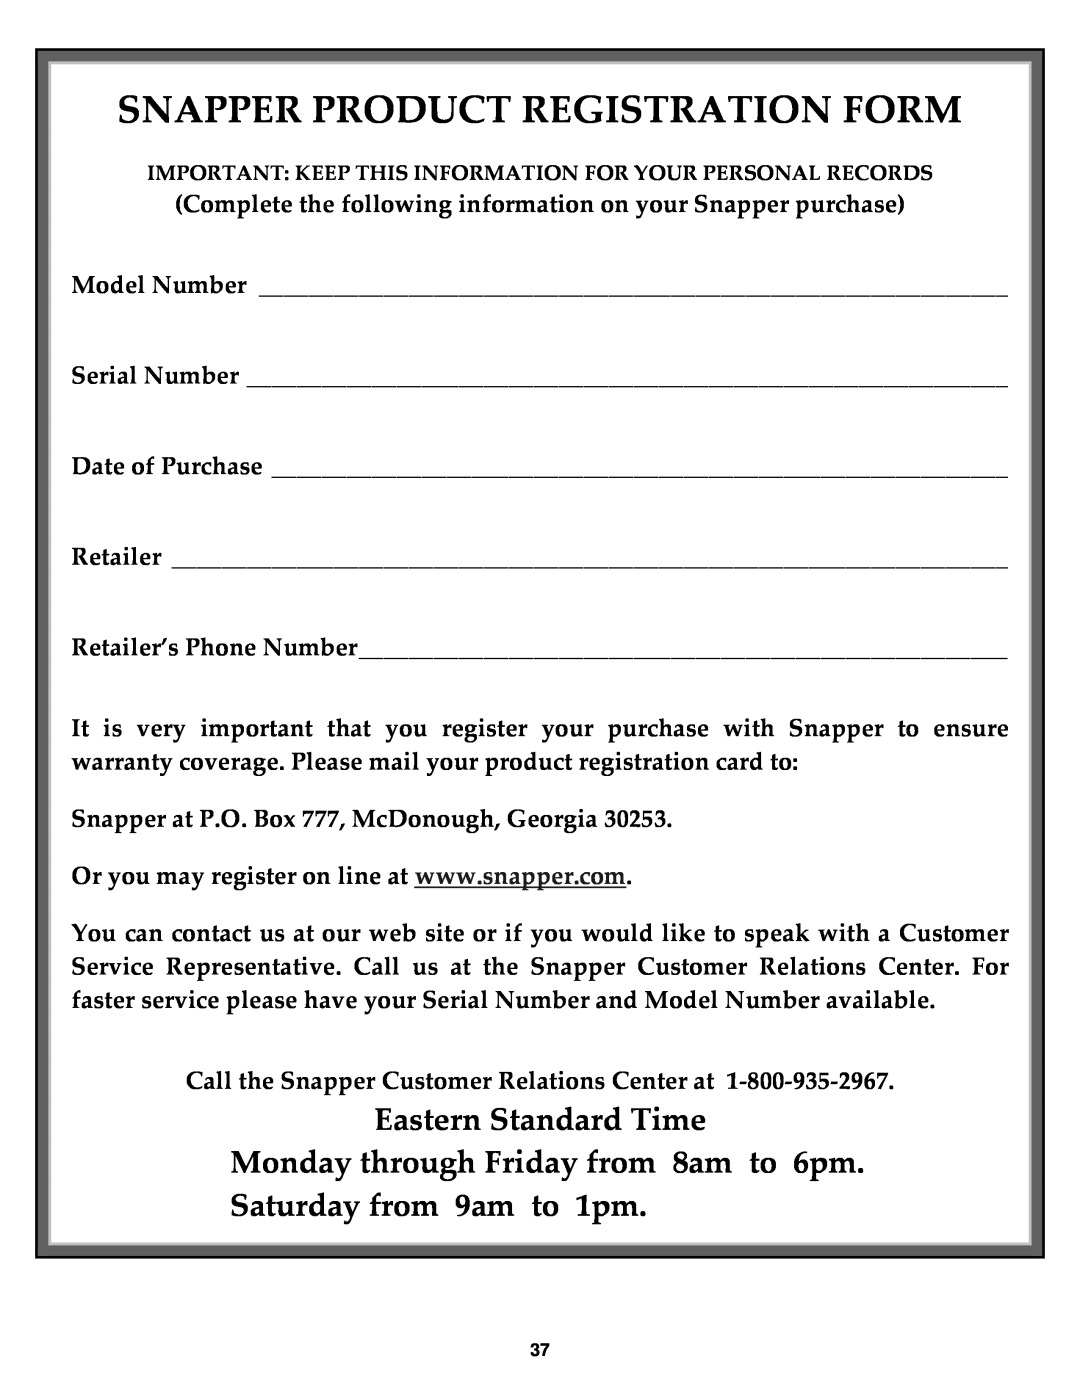 Snapper Snapper Product Registration Form, Eastern Standard Time Monday through Friday from 8am to 6pm 